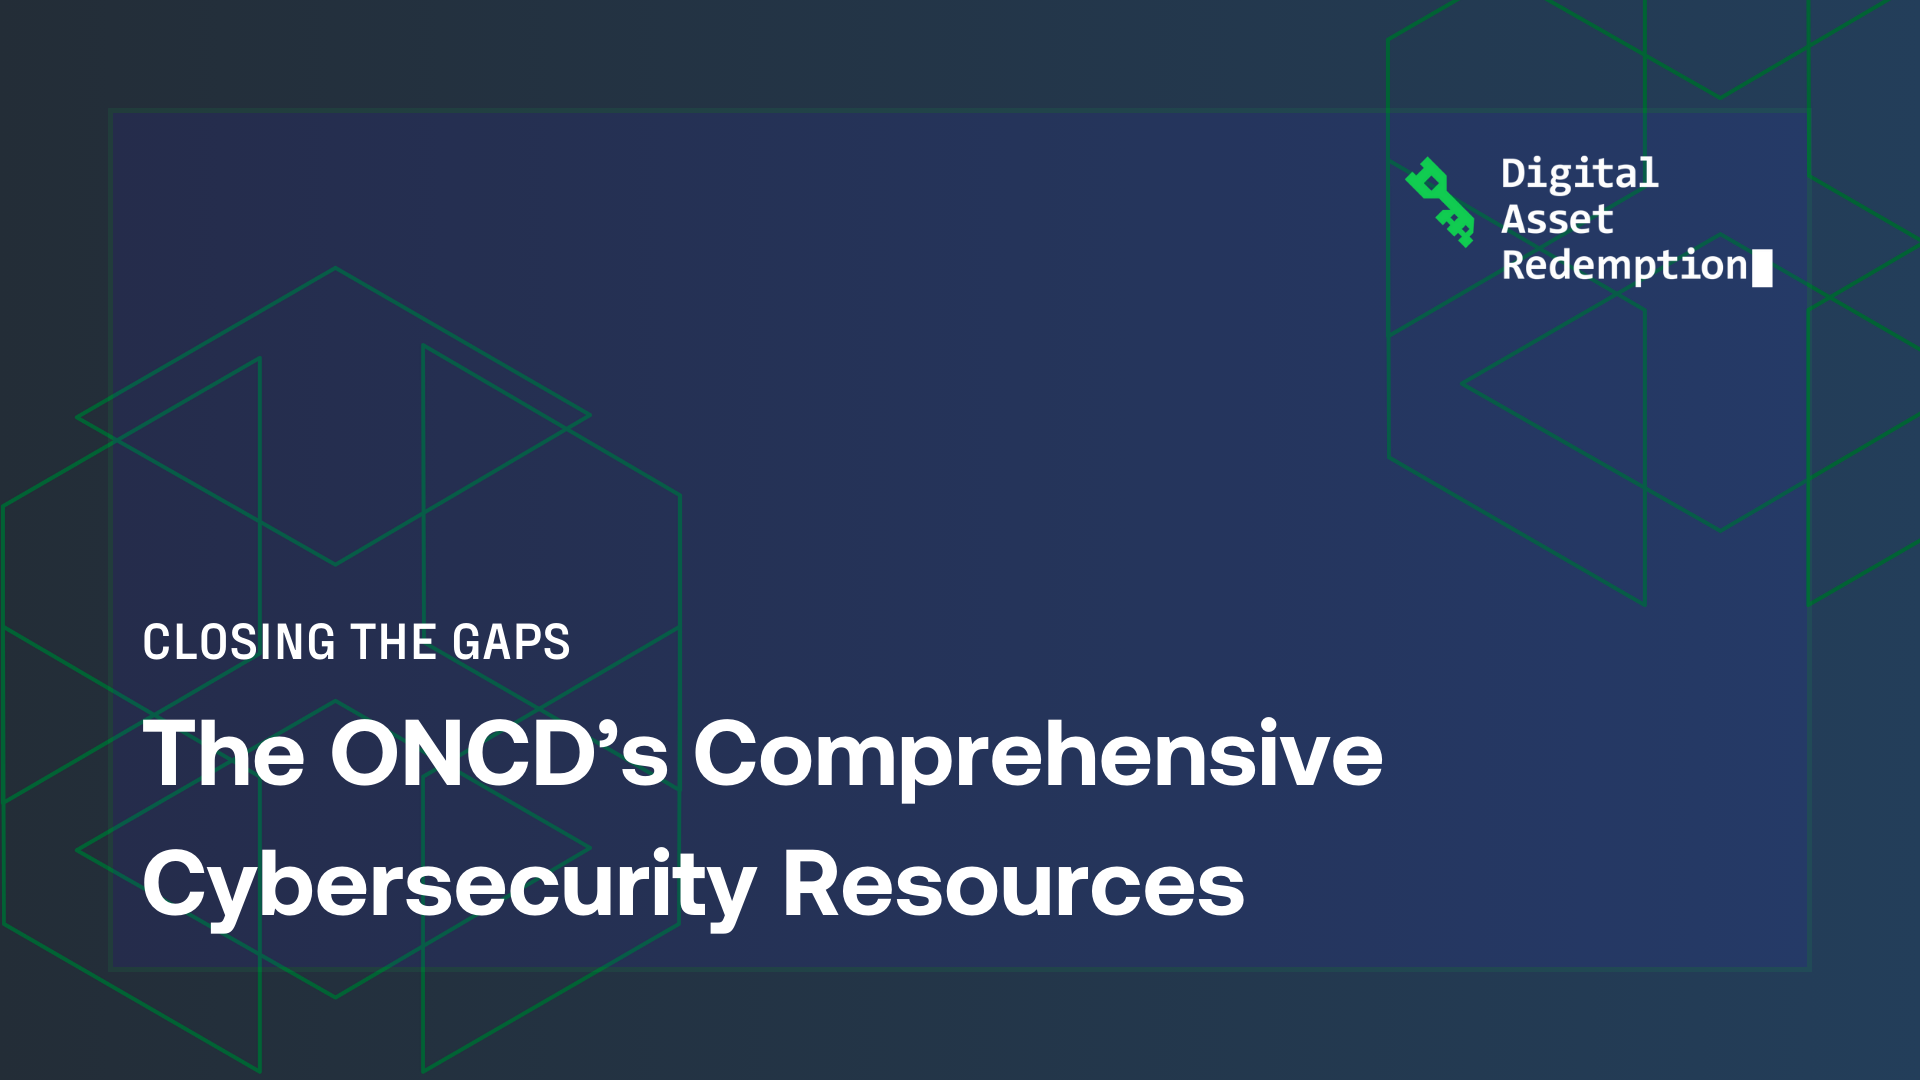 The ONCD’s Comprehensive Cybersecurity Resources